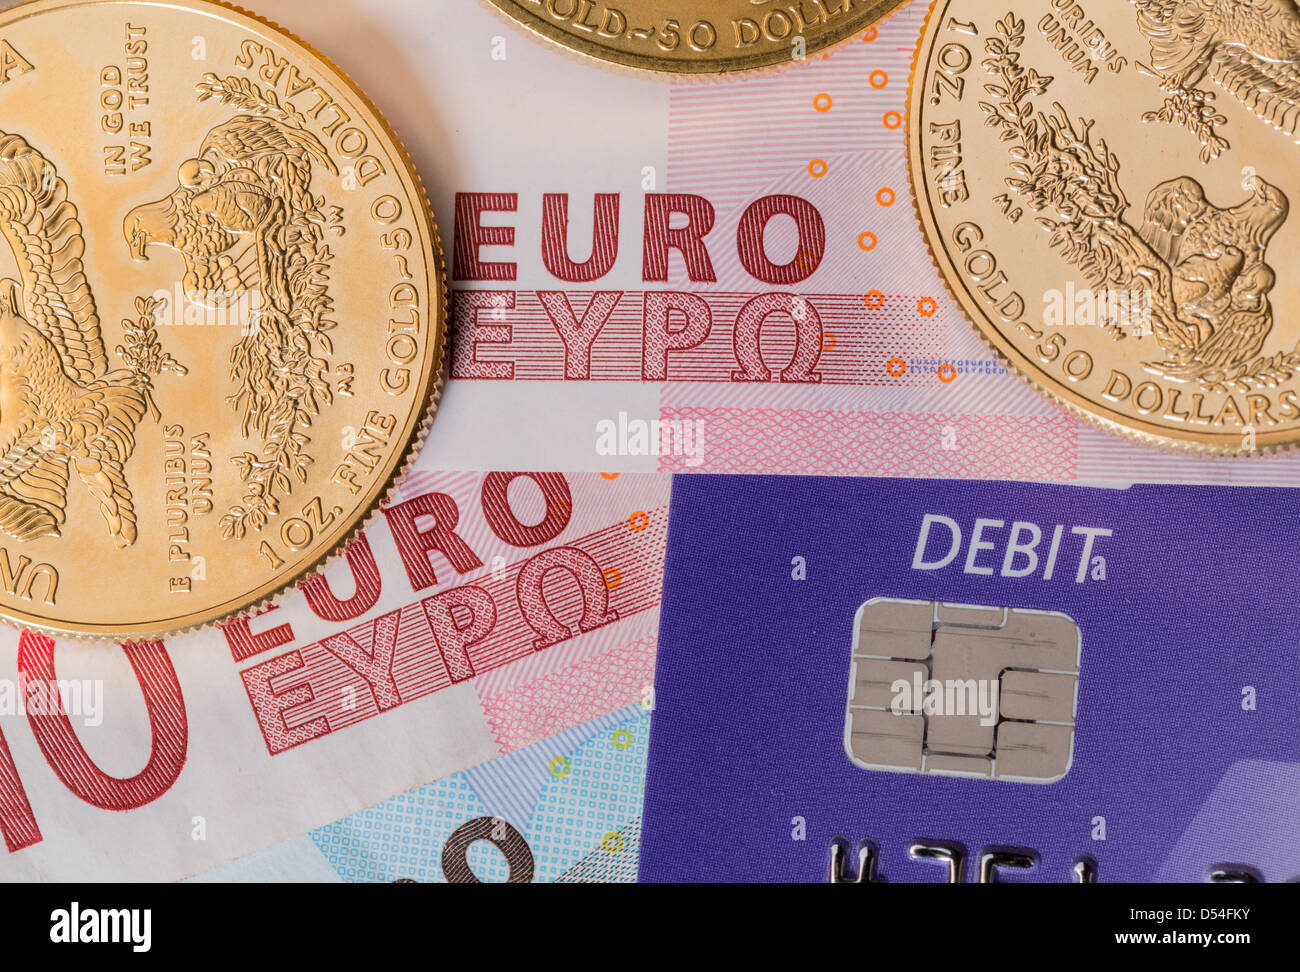 Solid gold coins contrasted with debit word on plastic card on euro note suggesting debt problems Stock Photo